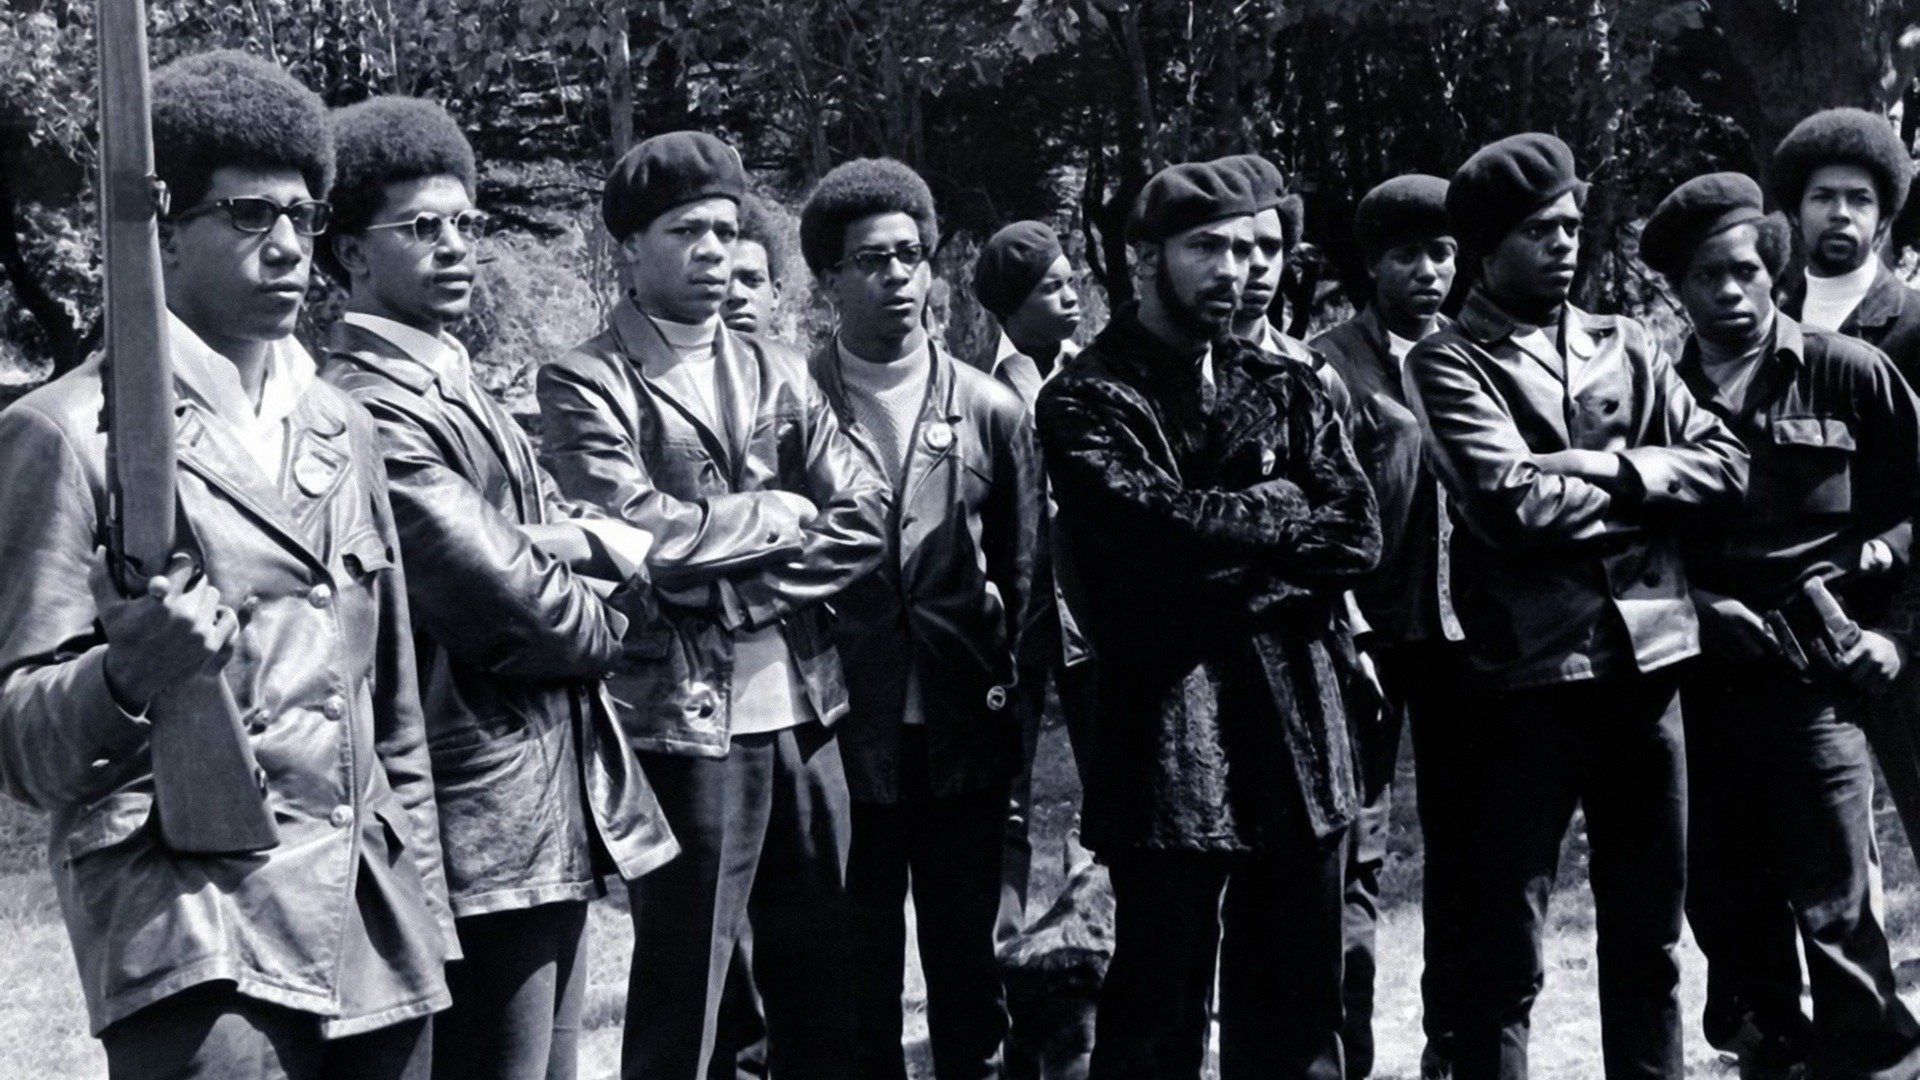 The Black Panthers: Vanguard of the Revolution background